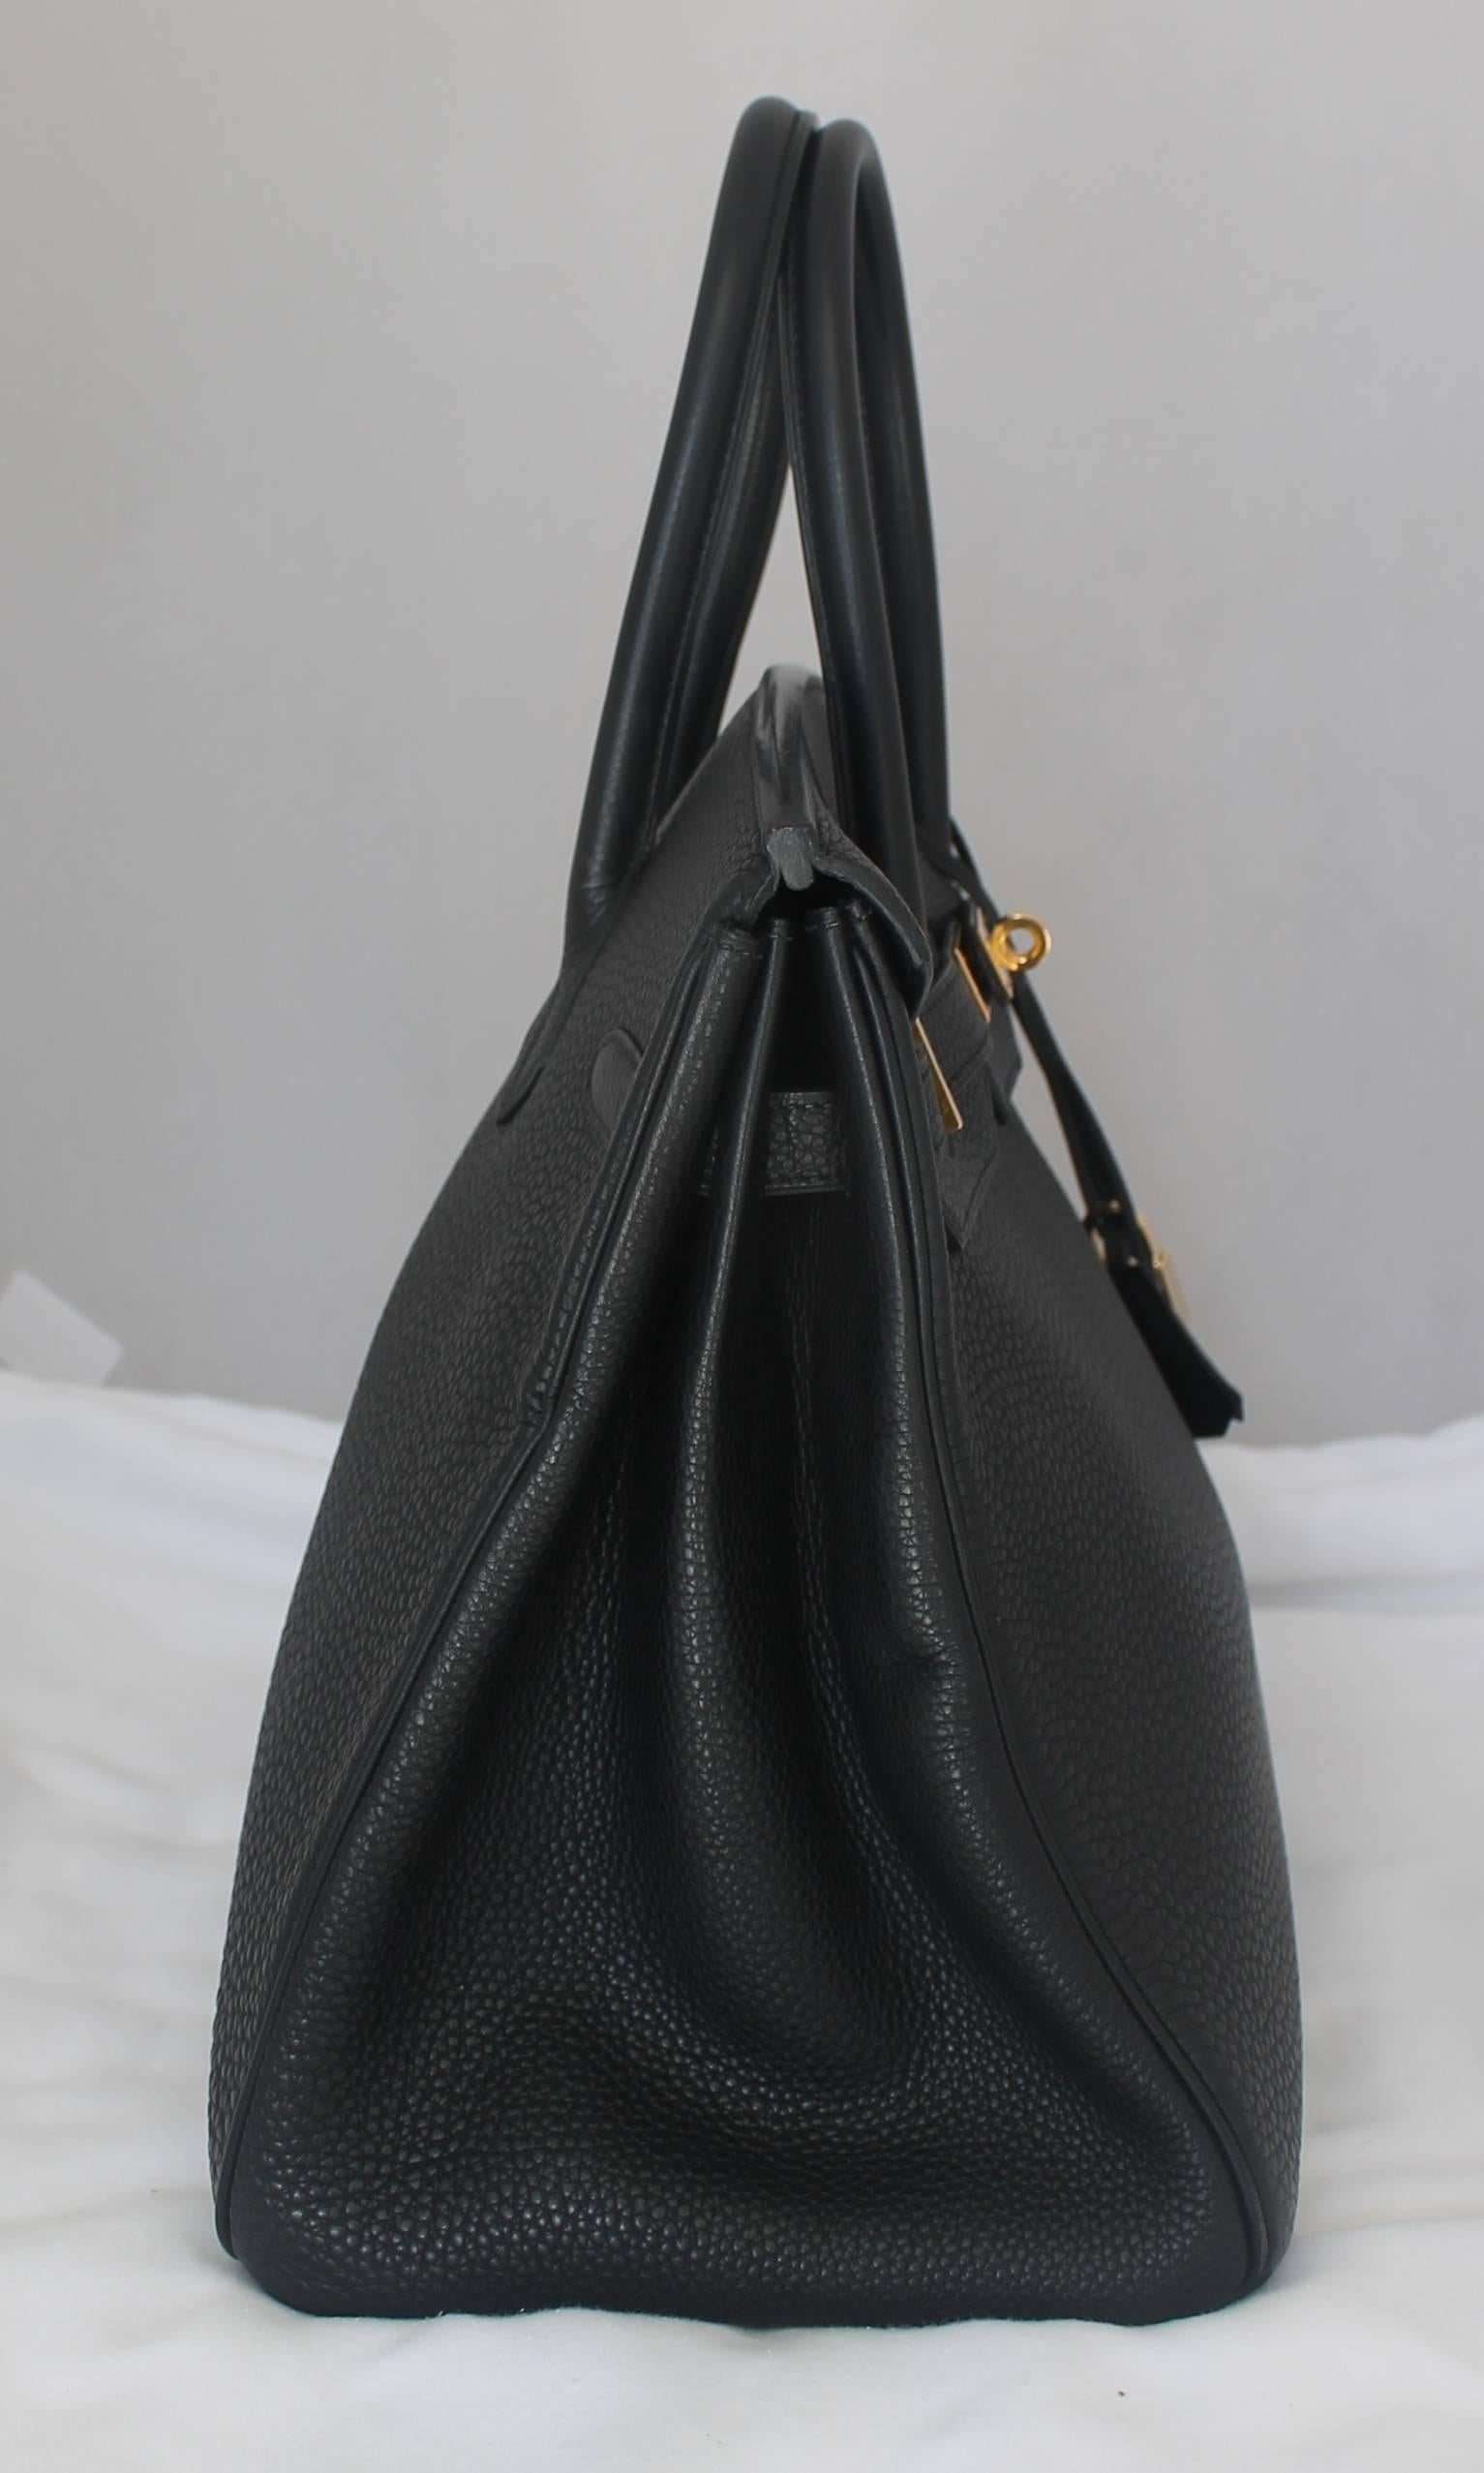 Hermes Black Togo 35 cm Birkin with Box, Duster, Rainpouch - GHW - 2002. This bag is in good condition with the only issue being scratching on the hardware, specifically on the front closure and feet. Besides that, the leather is in excellent